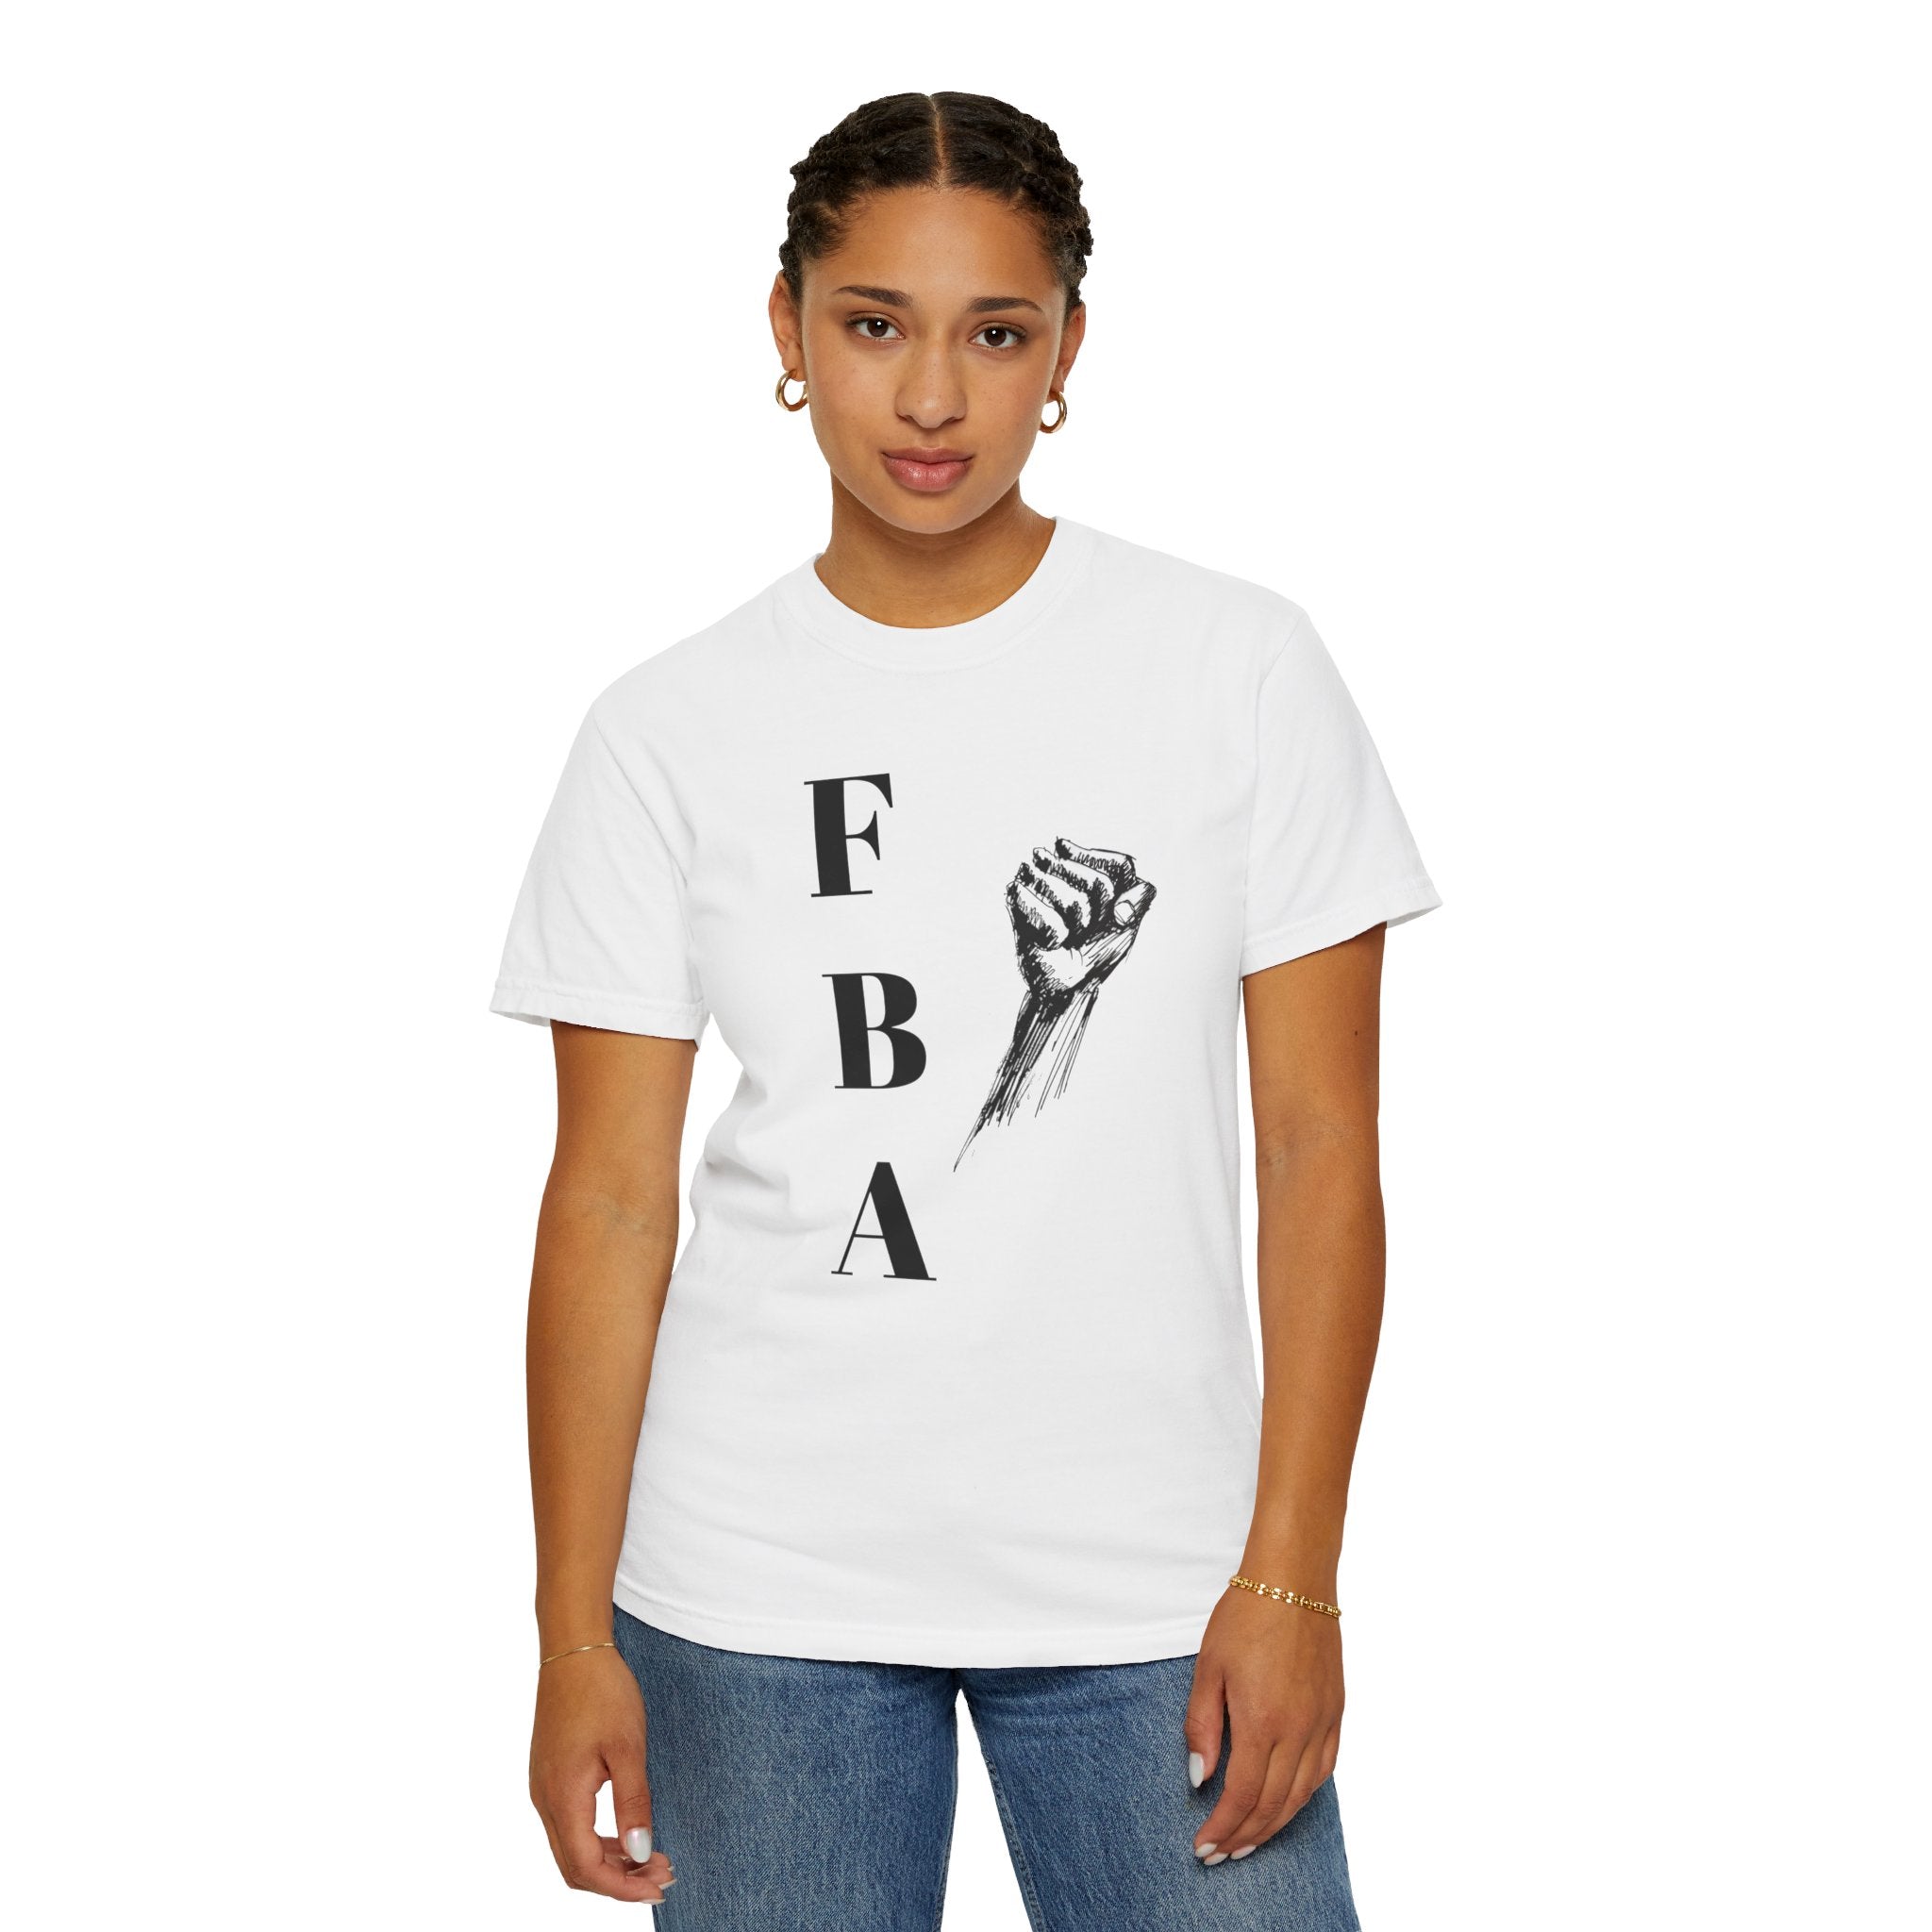 Heritage Pride: Foundational Black American (FBA) Unisex Garment-Dyed T-Shirt - Celebrate History and Identity